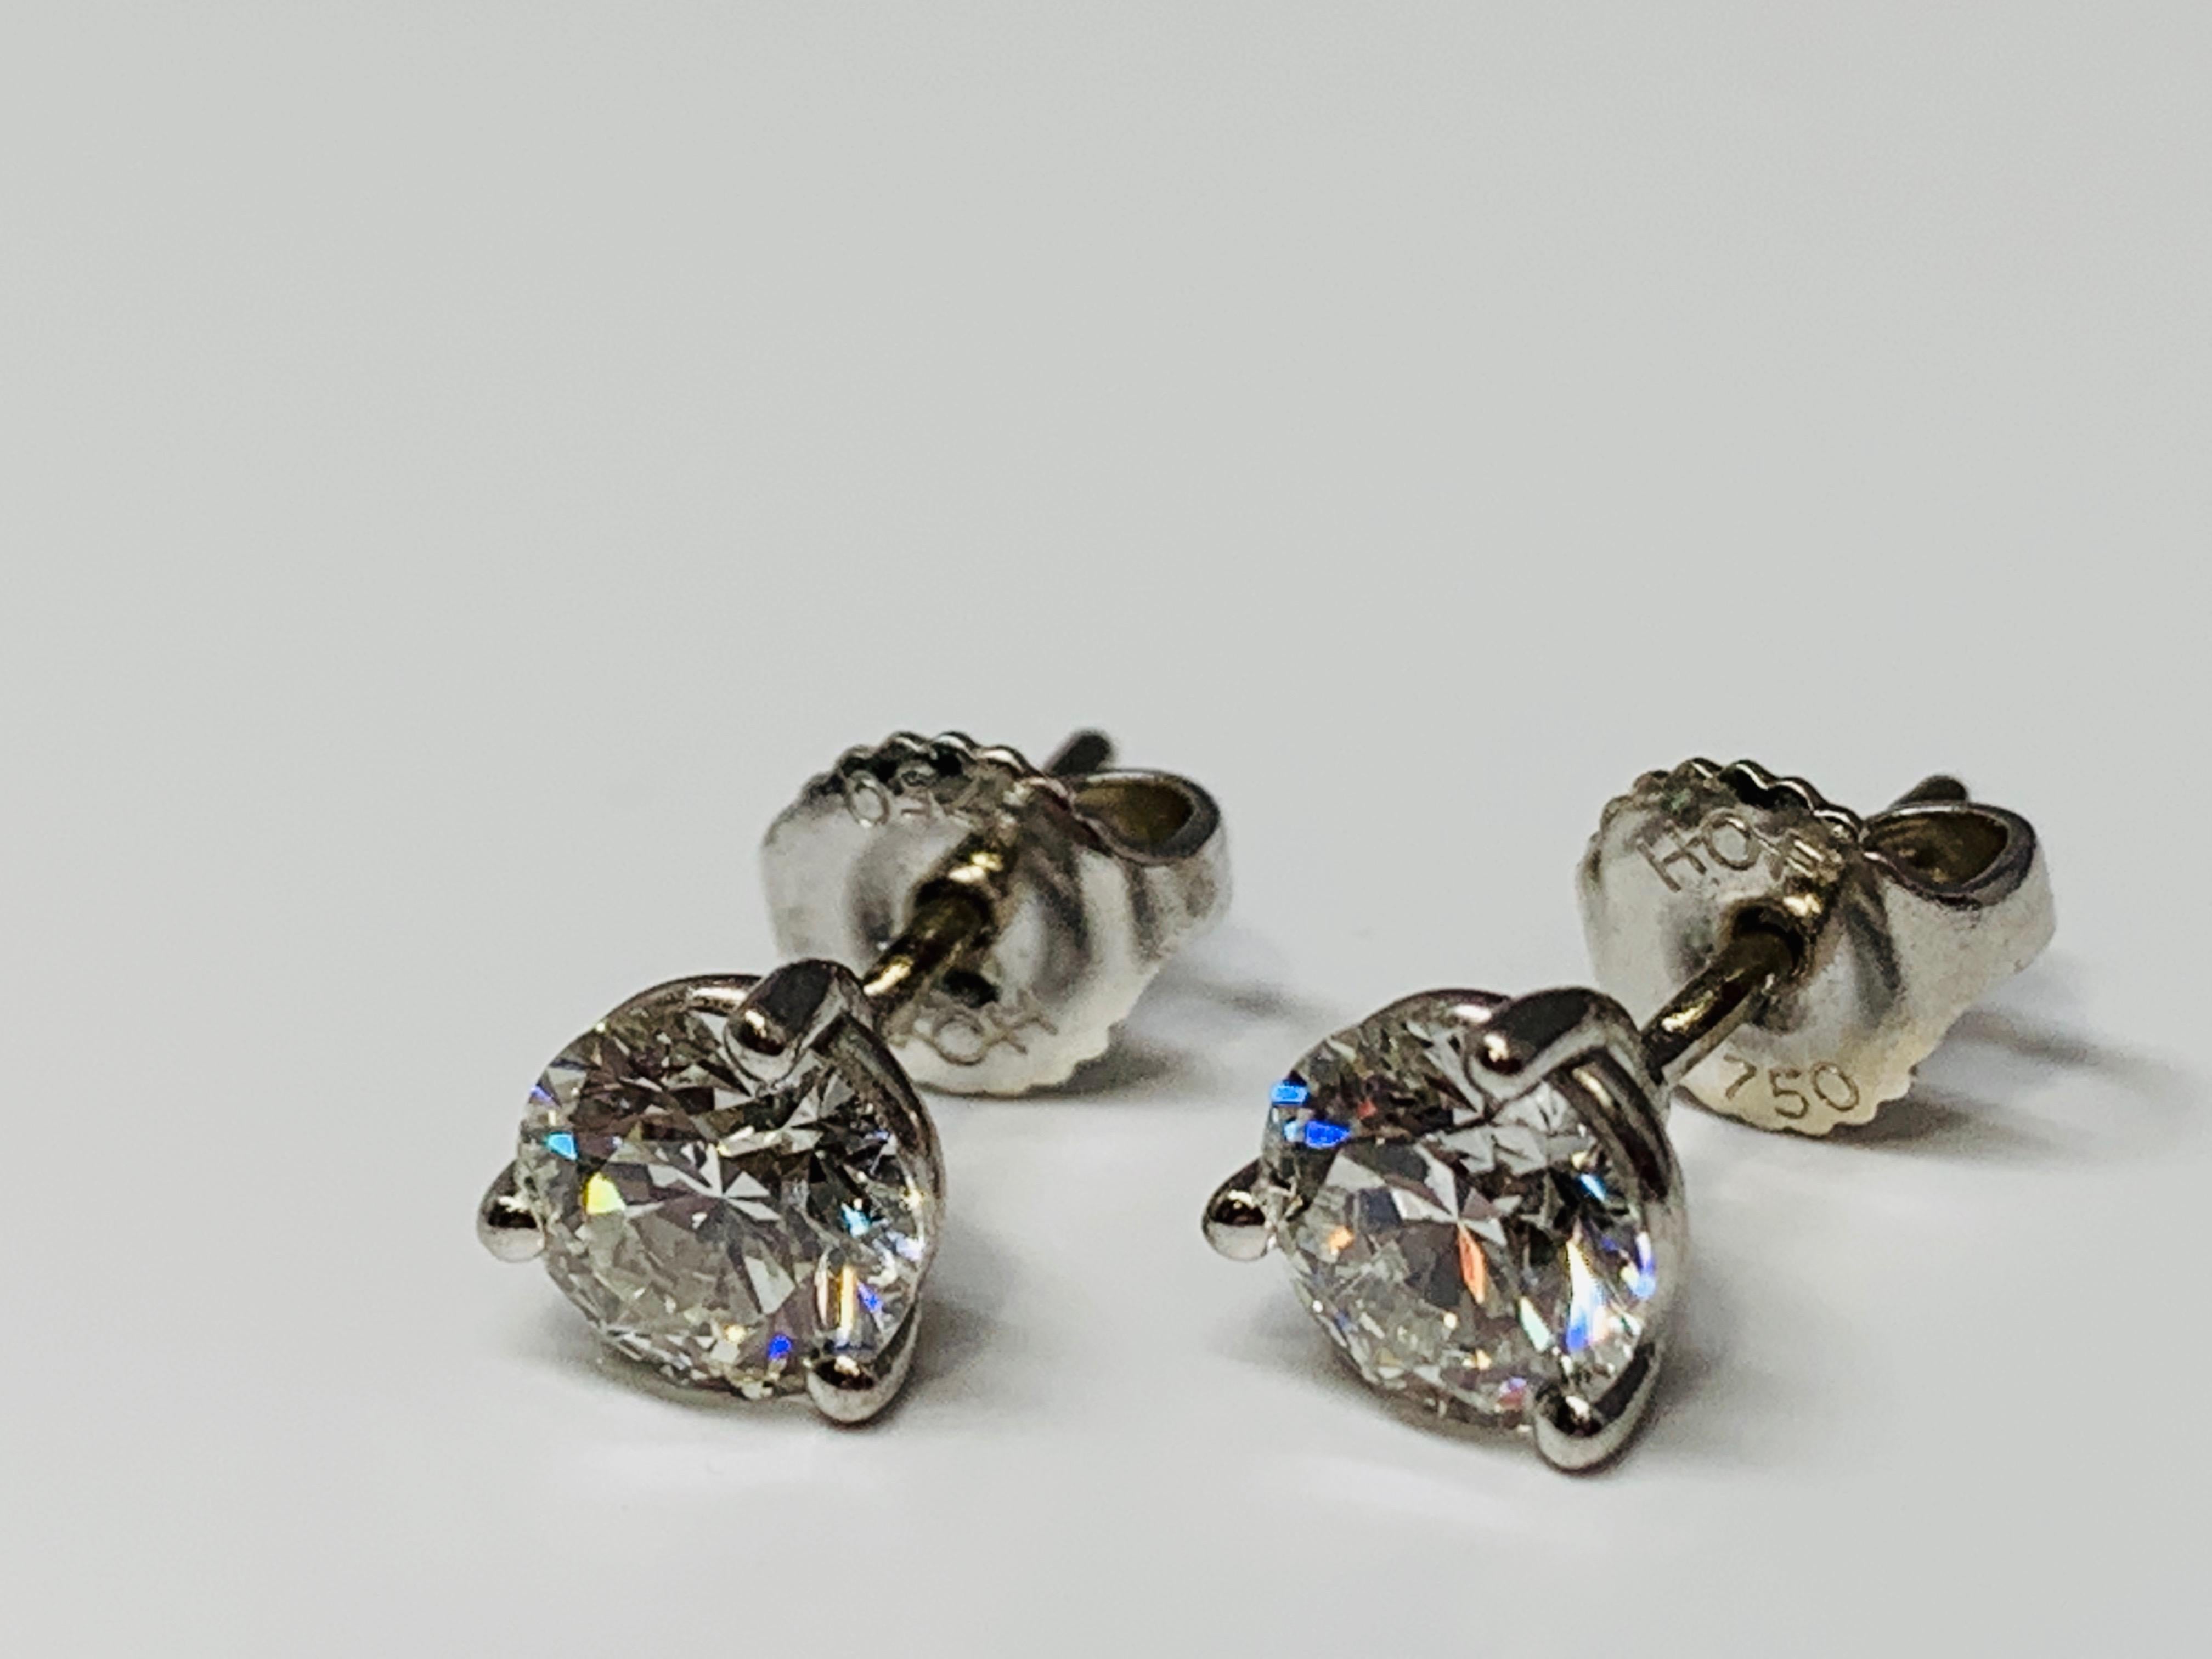 These gorgeous Hearts On Fire diamond earrings are set in a classic 18K white gold 3-prong martini style settings with sturdy tension backs. Each earring holds a fiery 0.75 carat round diamond with an estimated quality of I/VS-SI1. These earrings